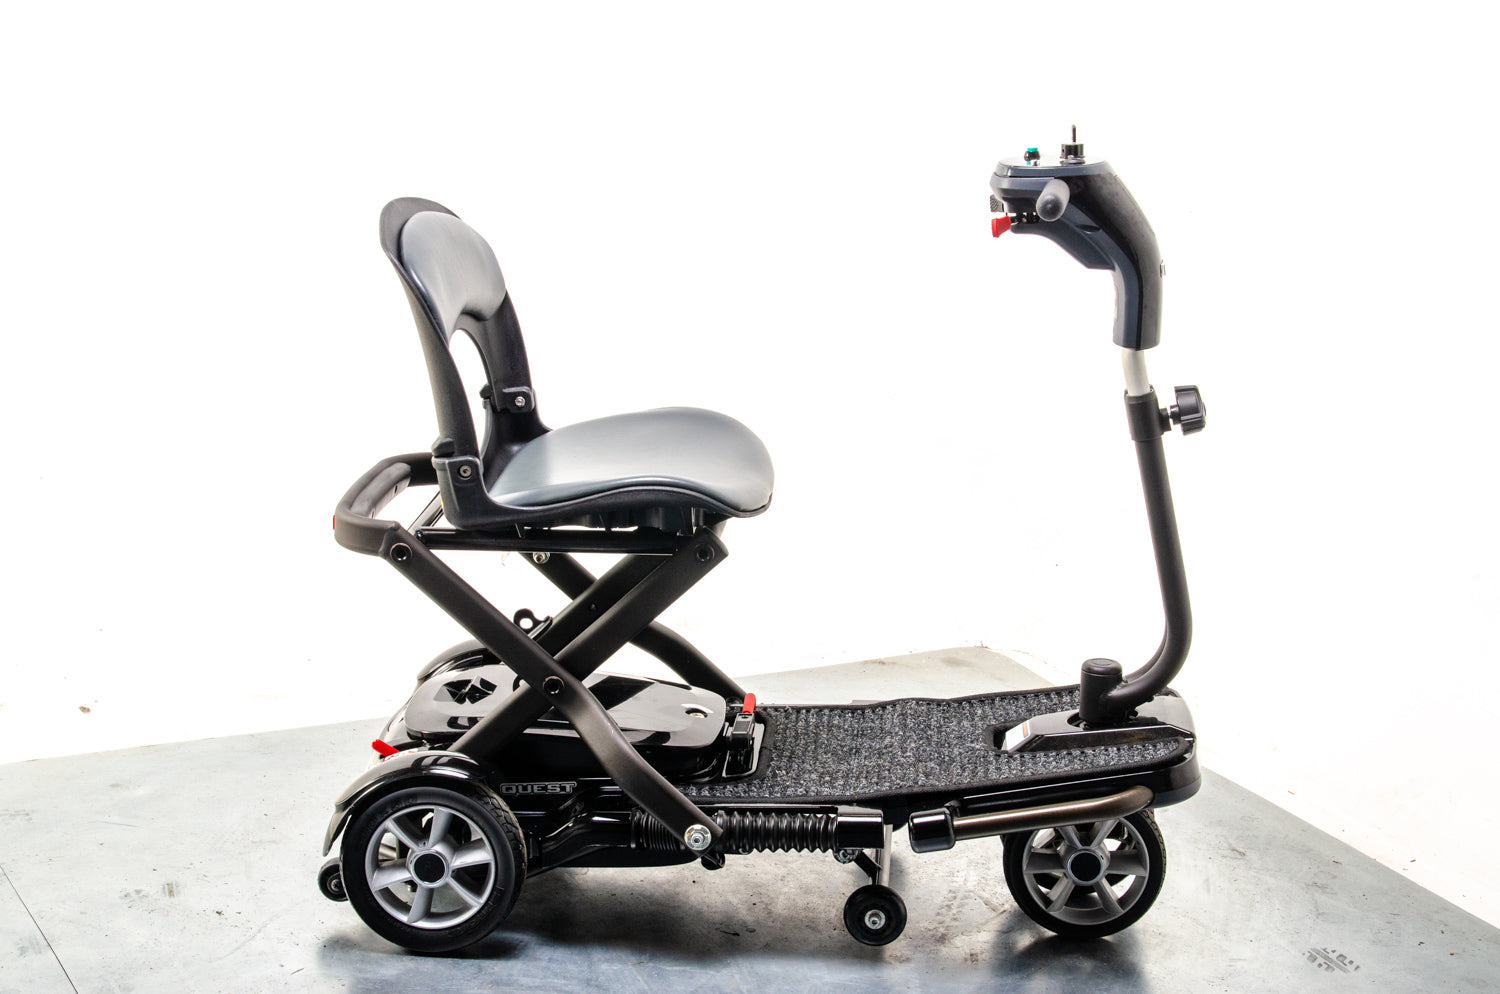 Pride Quest Lightweight Lithium Folding Travel Used Mobility Scooter Small Transportable Car 13410